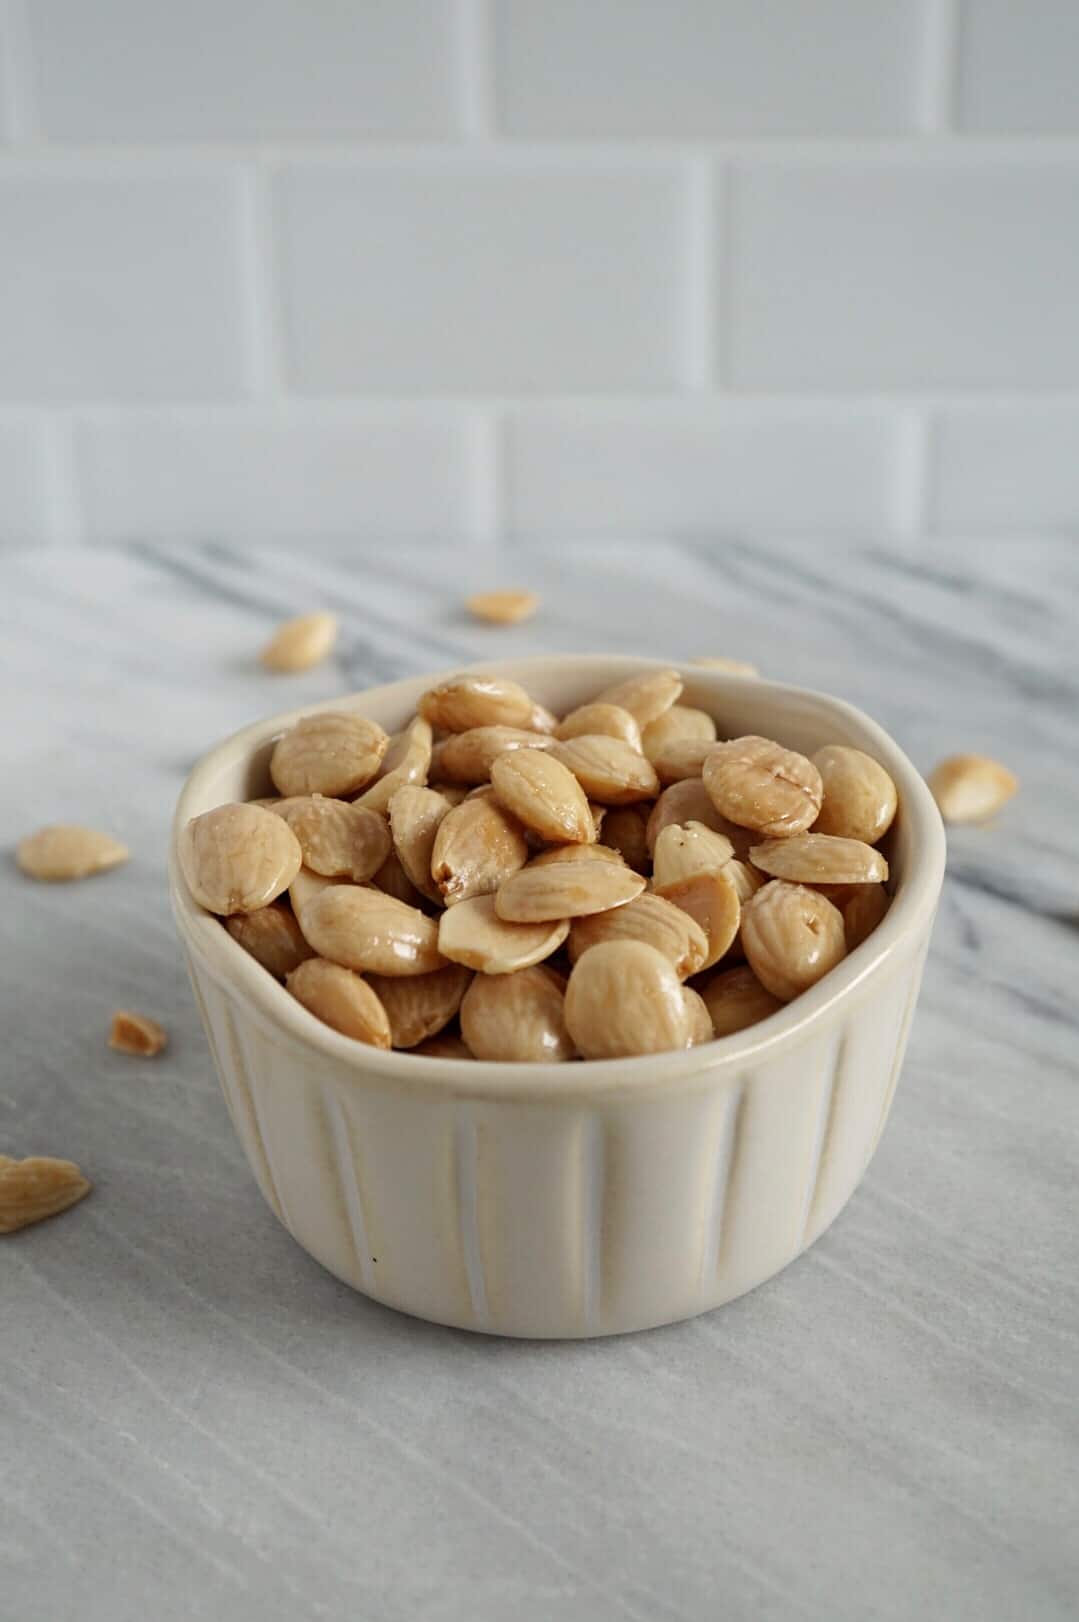 Marcona almonds in a white bowl on marble counter